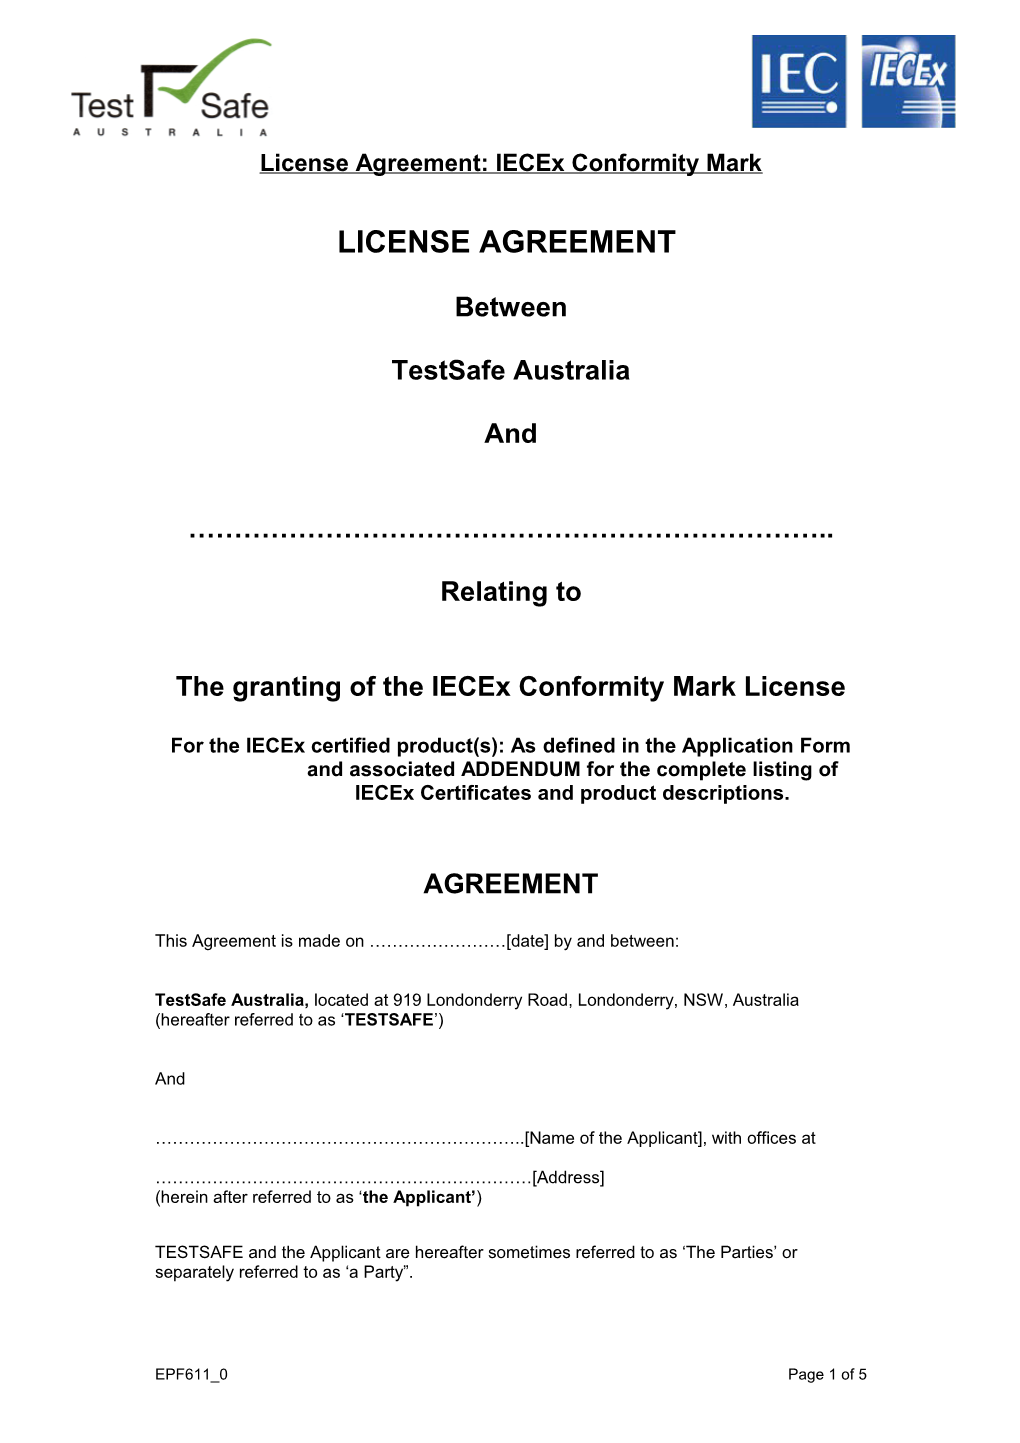 License Agreement: Iecex Conformity Mark